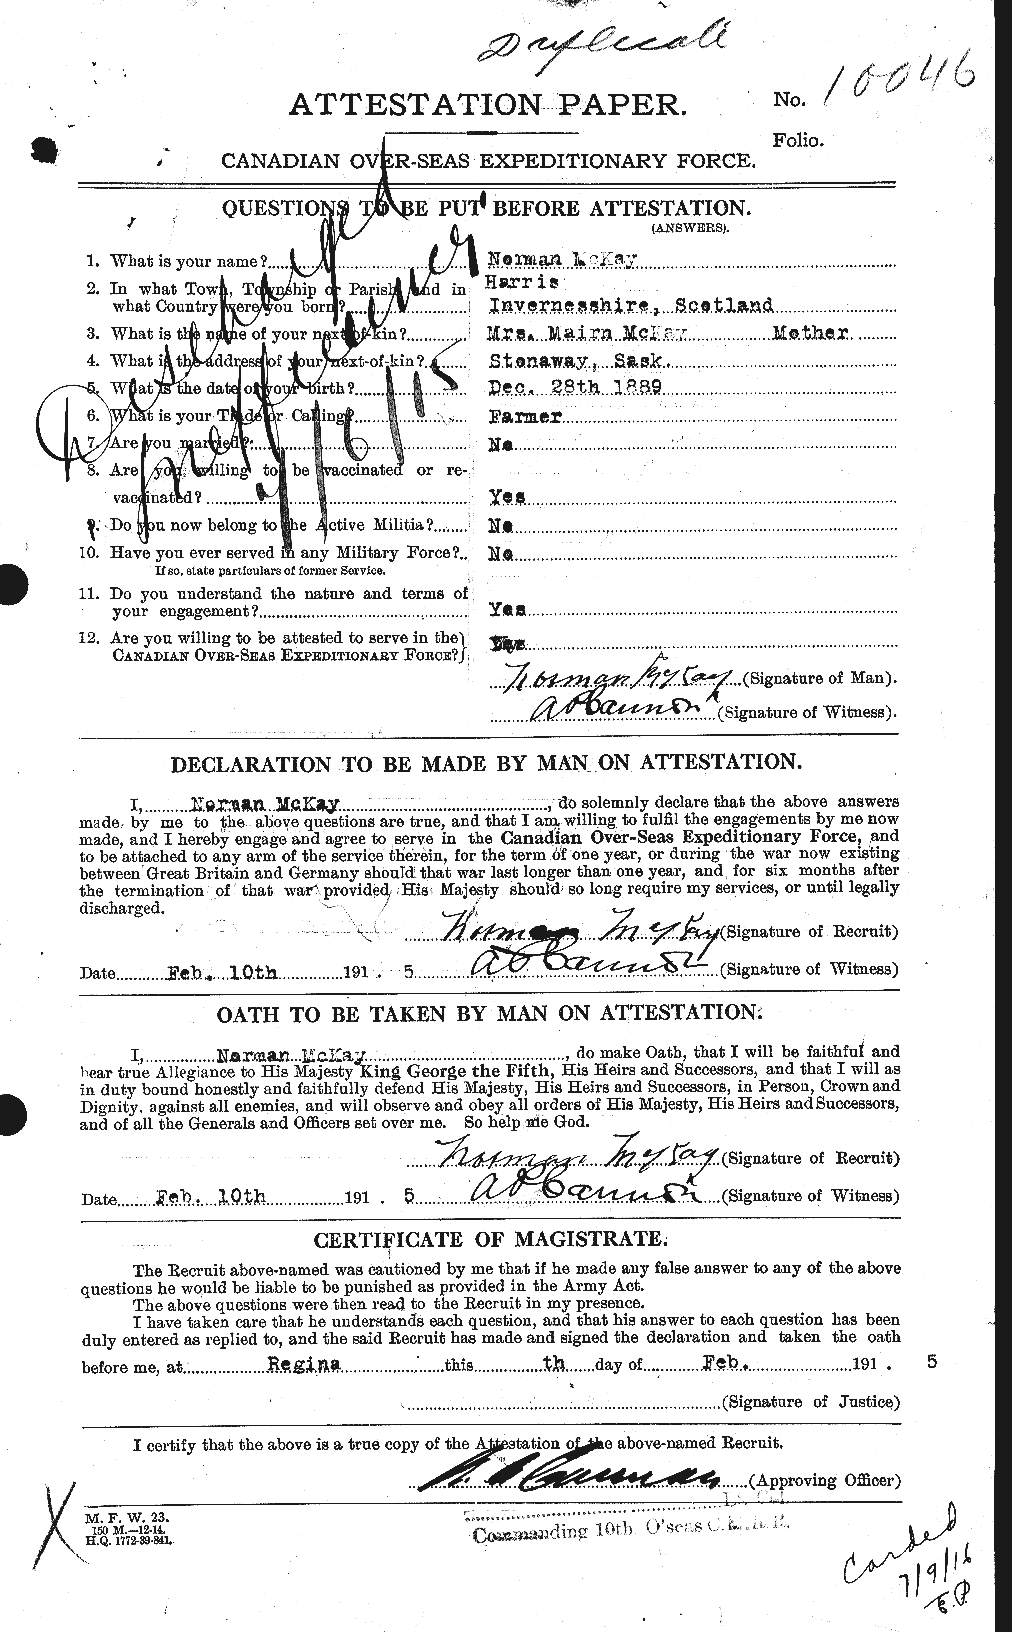 Personnel Records of the First World War - CEF 527215a